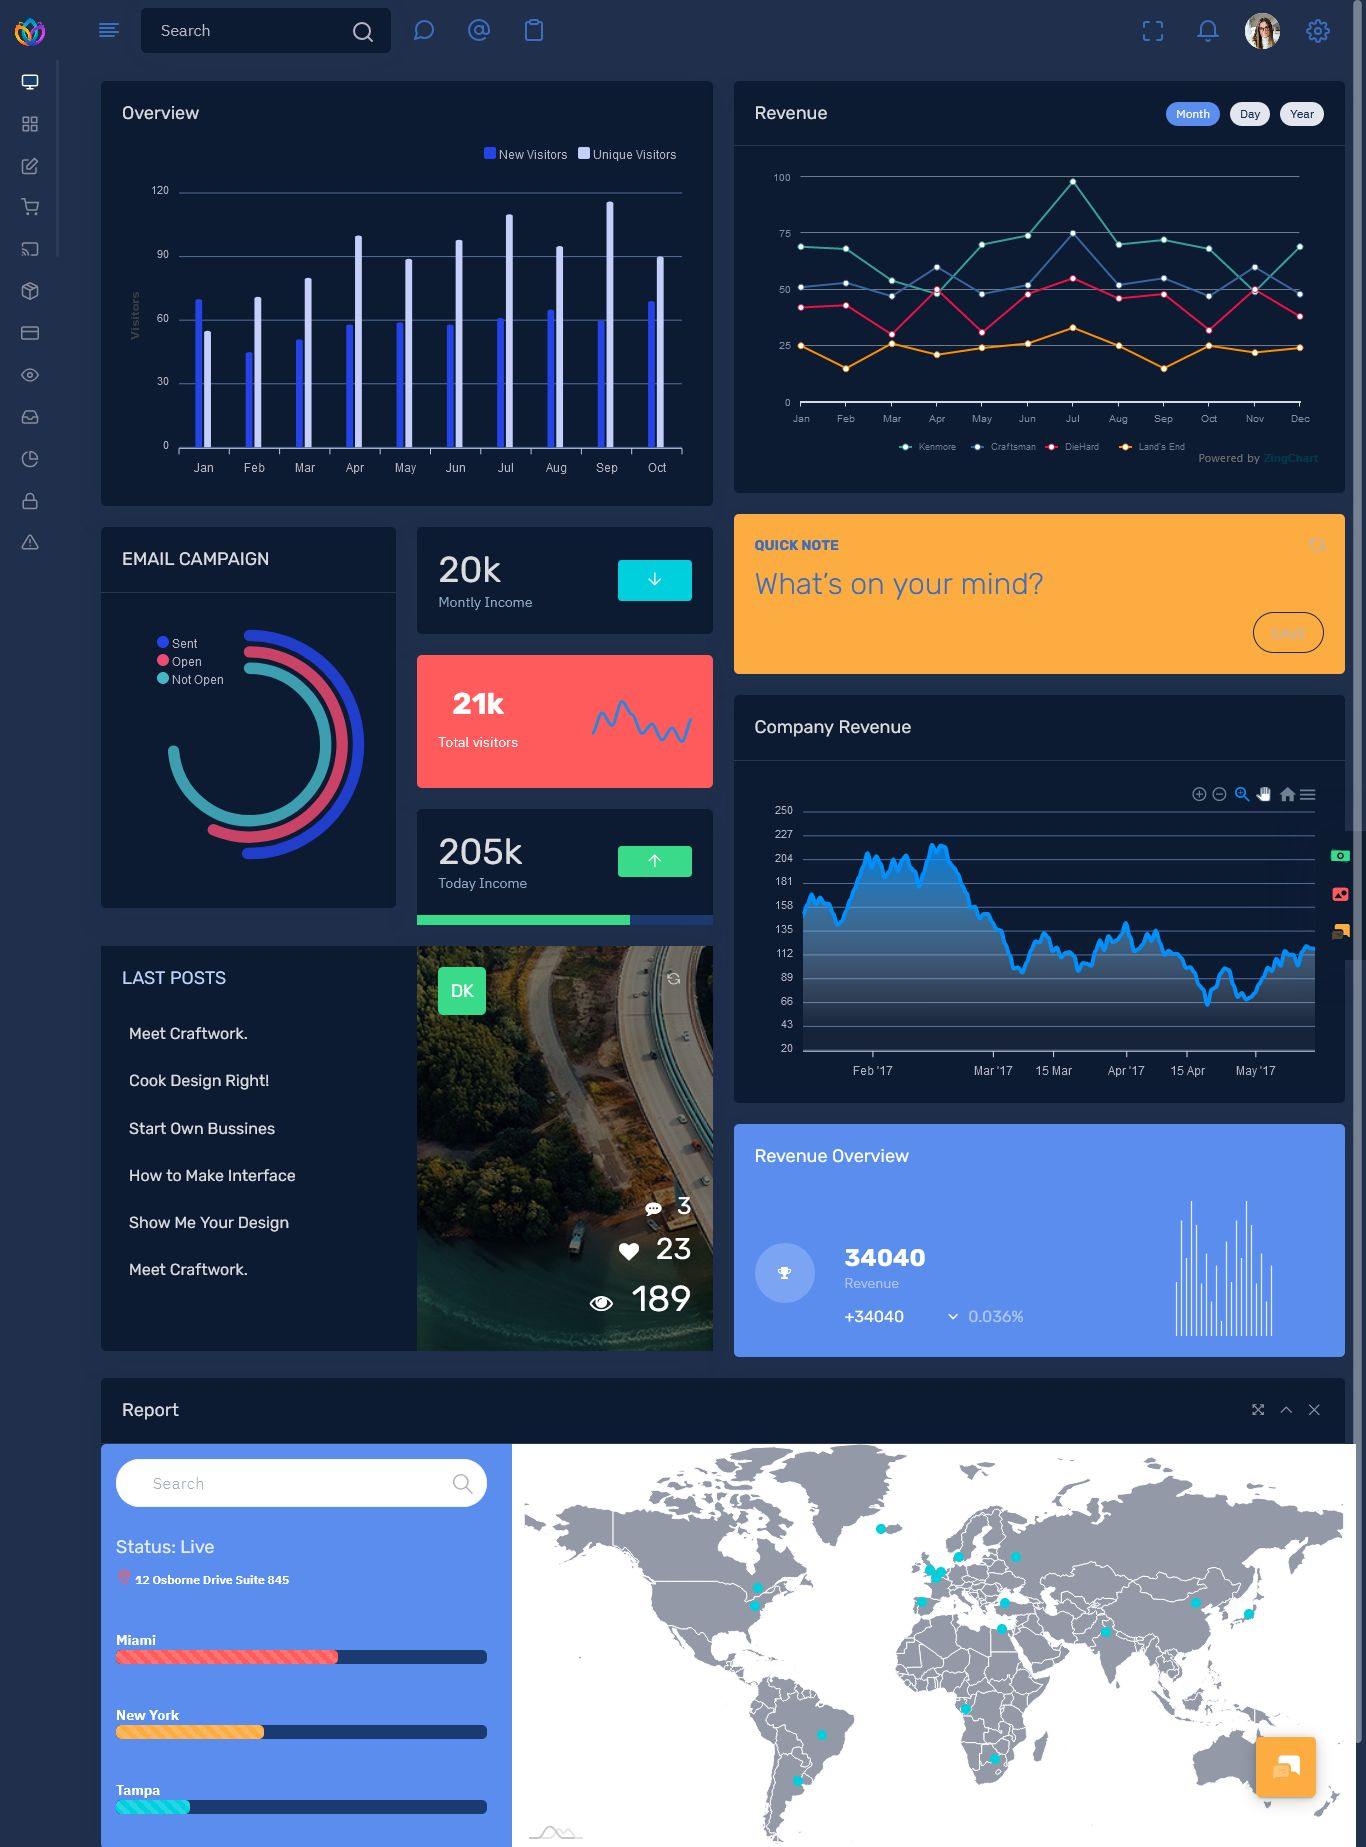 CrmX - Bootstrap Admin Dashboard Template & User Interface